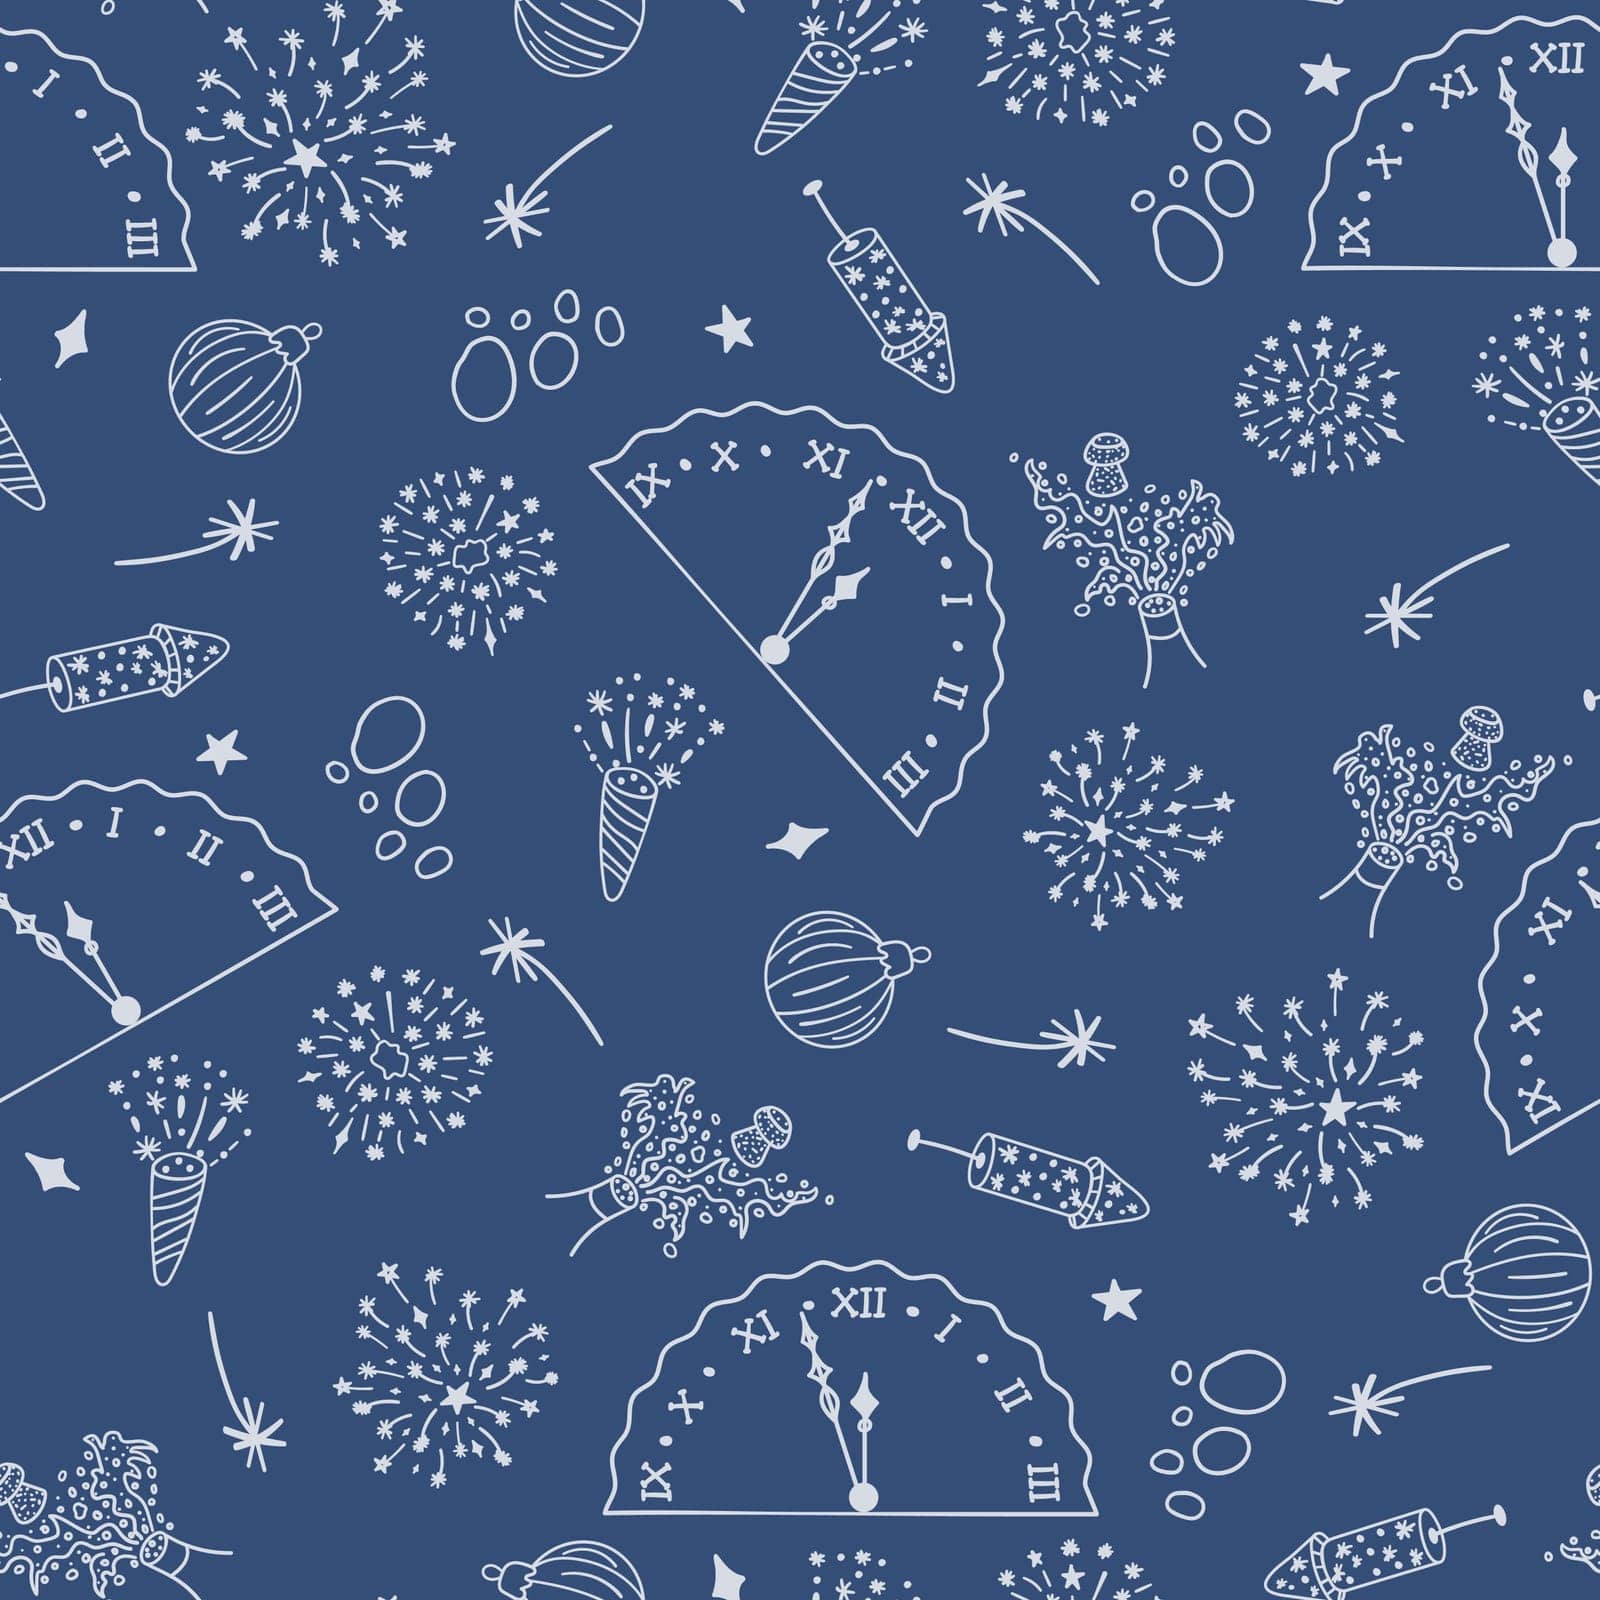 Seamless pattern with New Year s clipart. Hand drawn New Year s chimes, champagne bottleneck with foamy splashes and a flying cork, fireworks, firecracker, Christmas tree toy